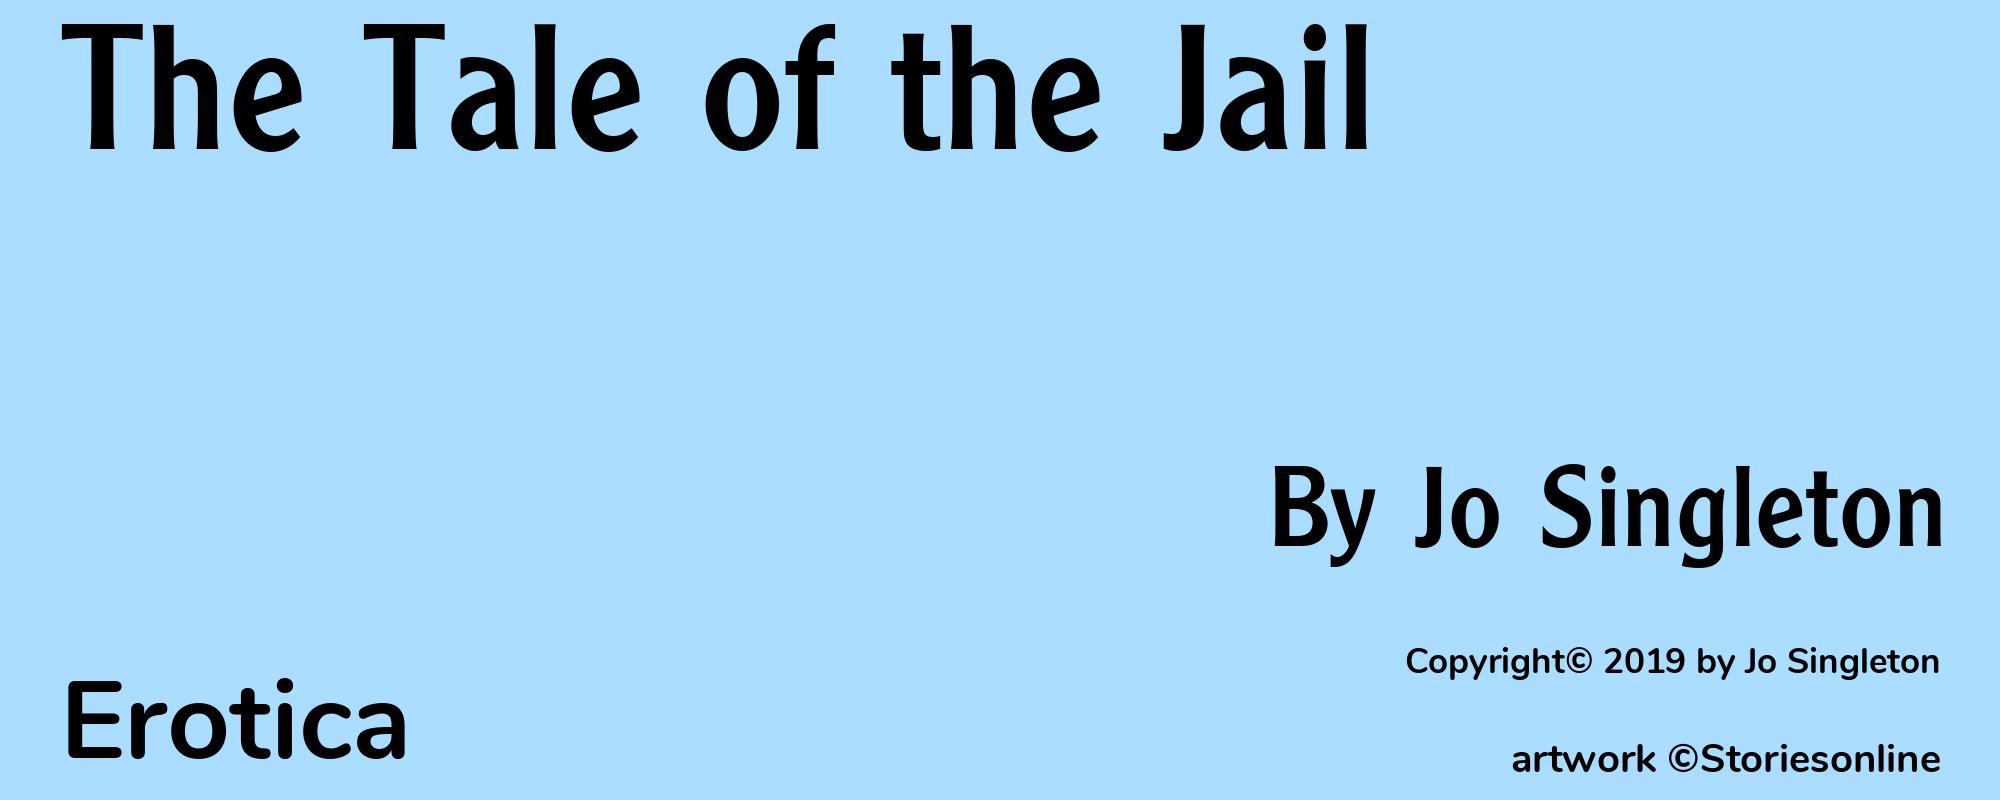 The Tale of the Jail - Cover